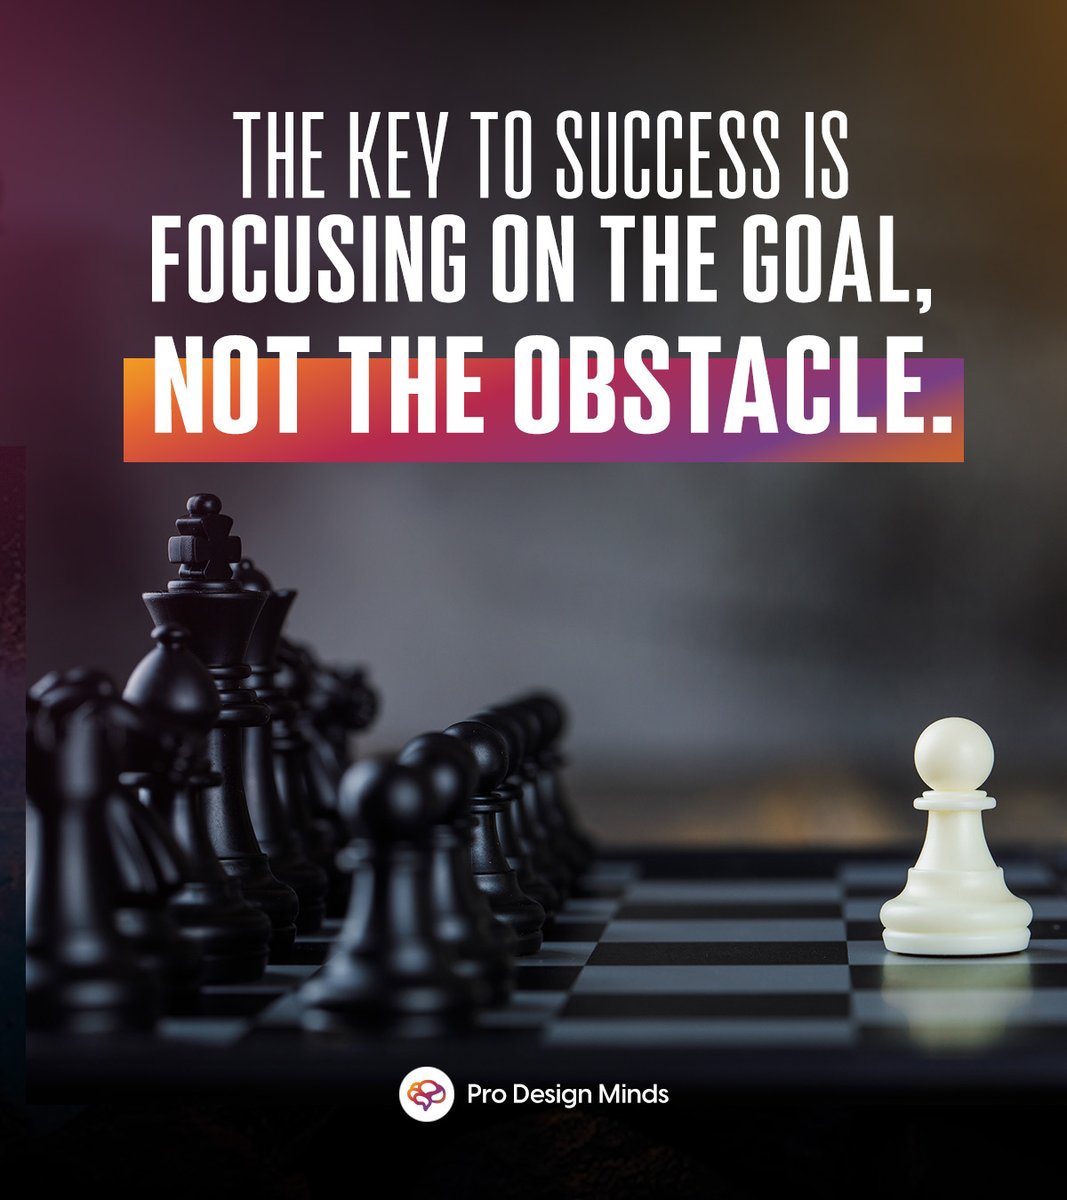 Don't let obstacles blur your vision.
When you fix your gaze on your ambition, the challenges fade away.
.
.
.
.
.
.
#ProDesignMinds #SuccessMindset #FocusOnTheGoal #OvercomeObstacles #UnleashYourPotential #Motivation #Inspiration #SEO #DigitalMarketing #Karachi #Pakistan